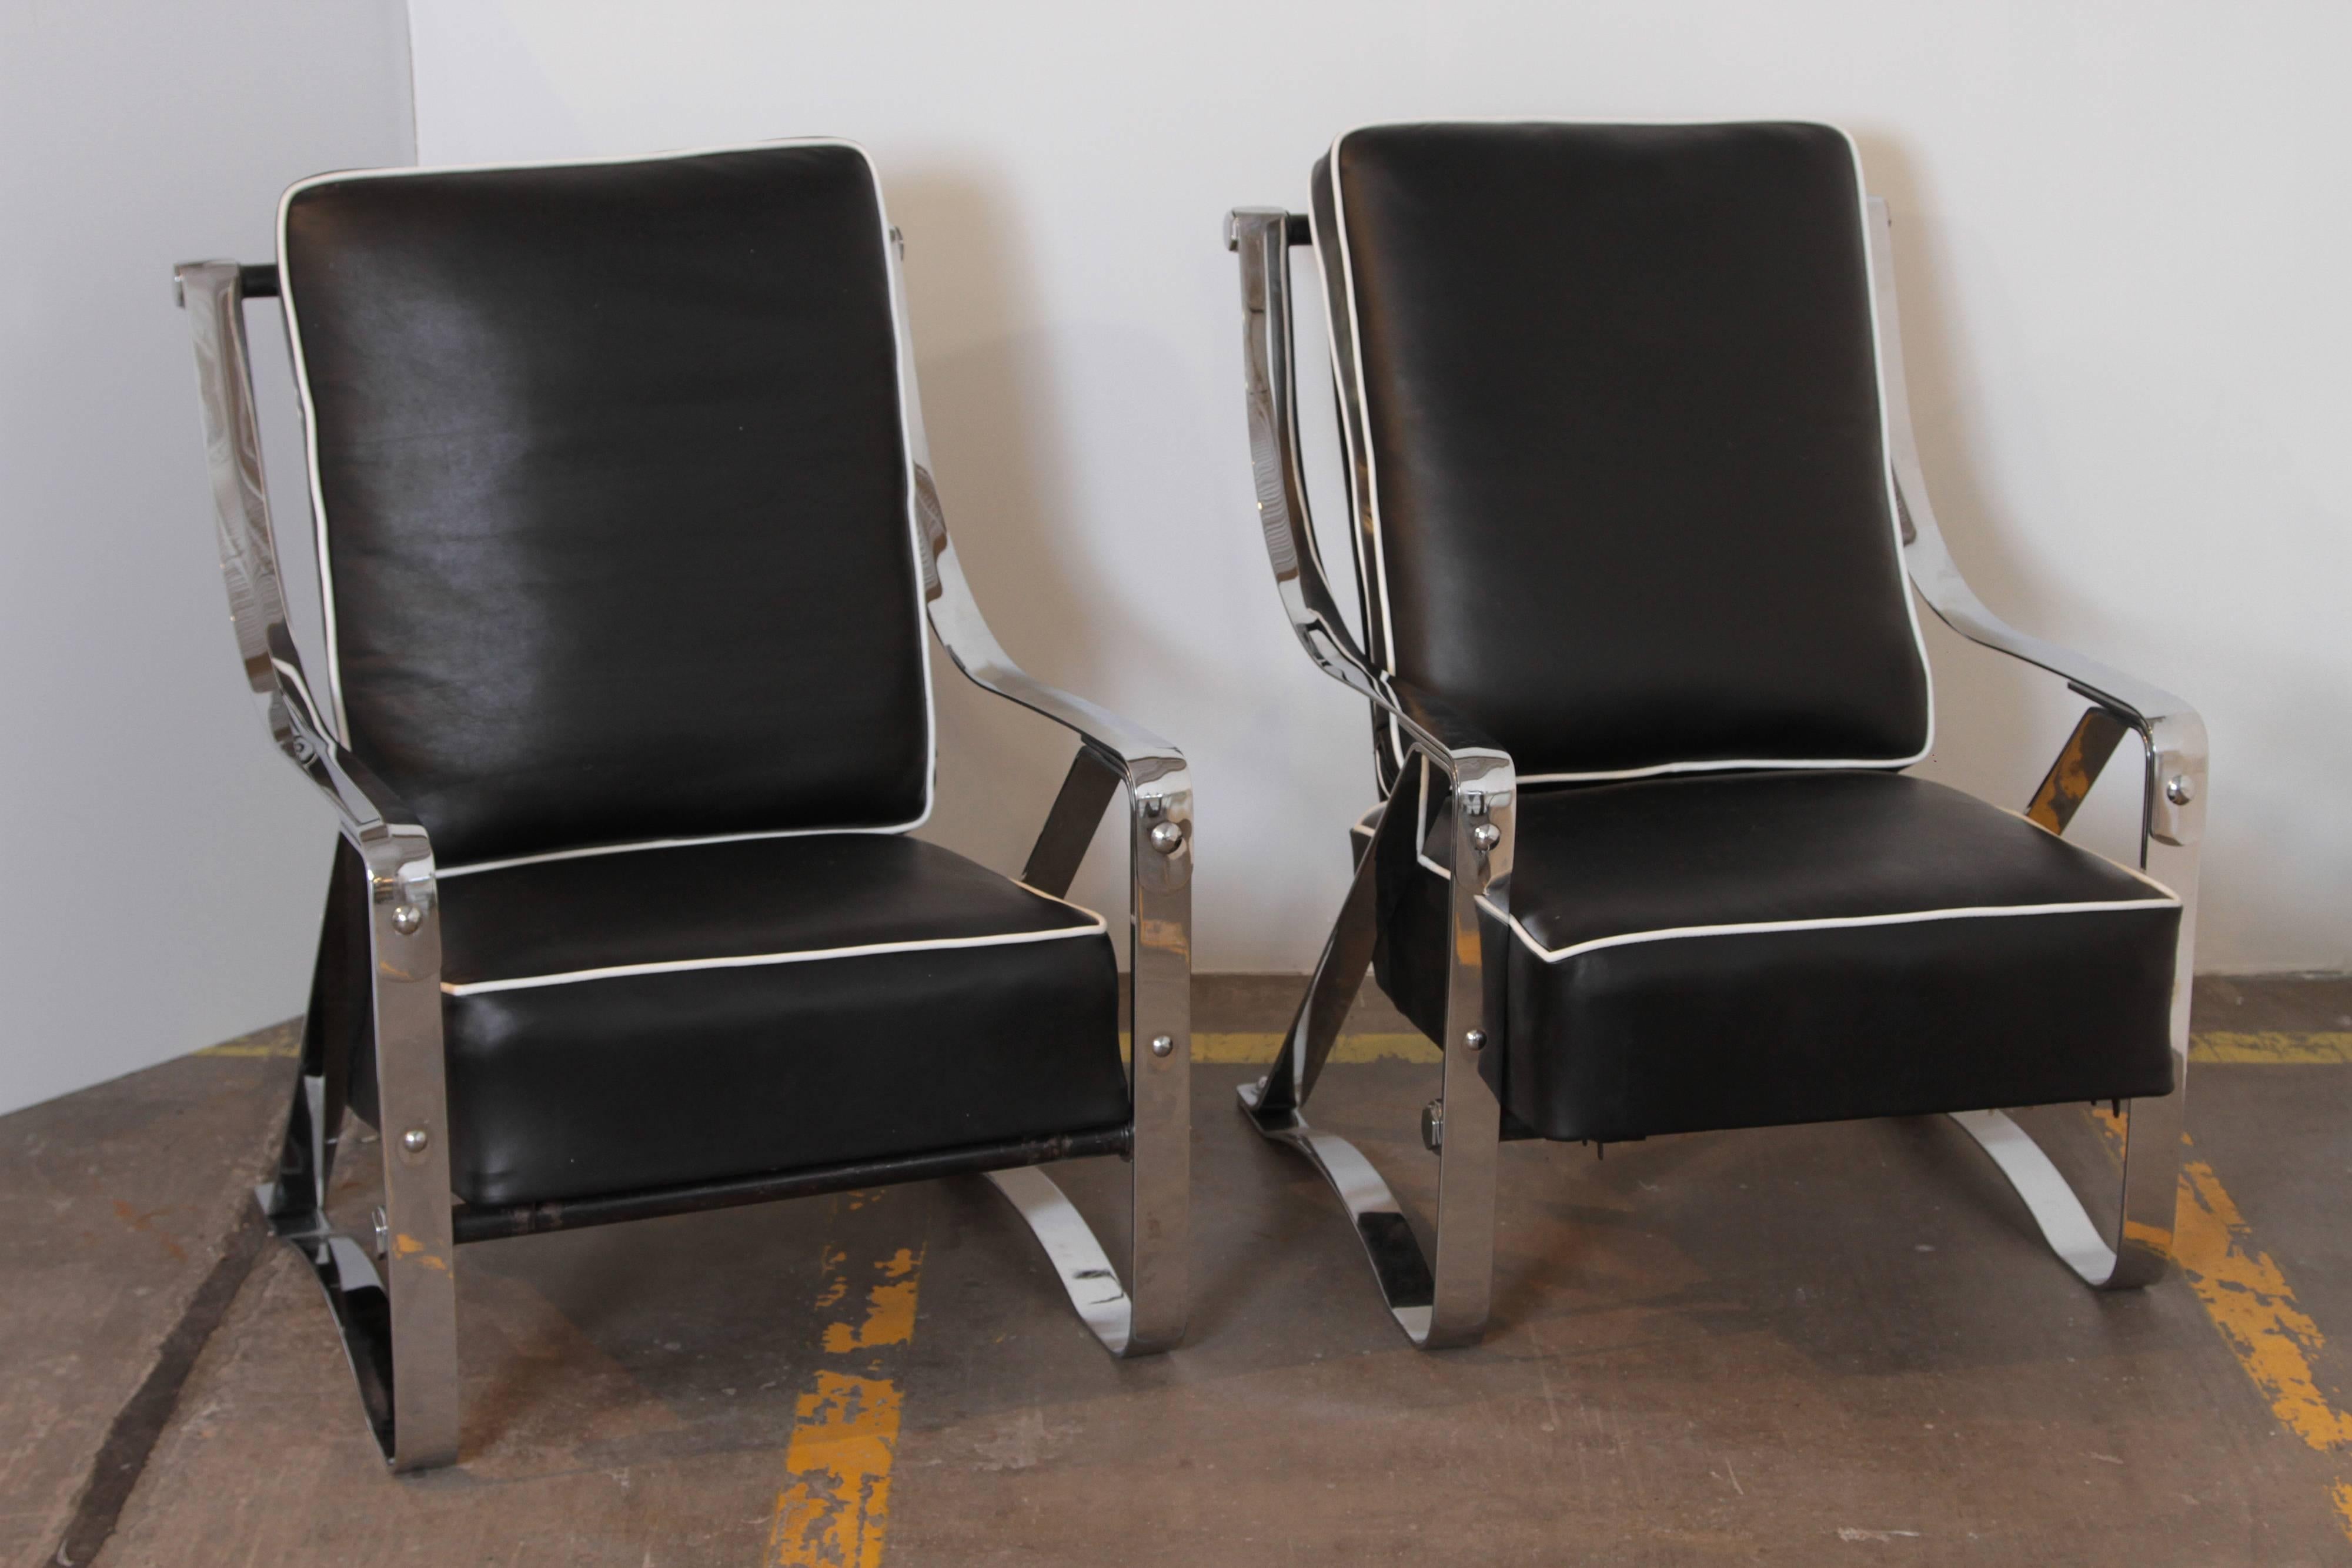 Machine Age Art Deco McKay Craft streamline pair of cantilevered lounge chairs.  PRICE REDUCED

Fully-restored condition.
Re-plated polished chrome original steel frames, new black hide leather sling and cushions with white leather piping. 
Re-tied